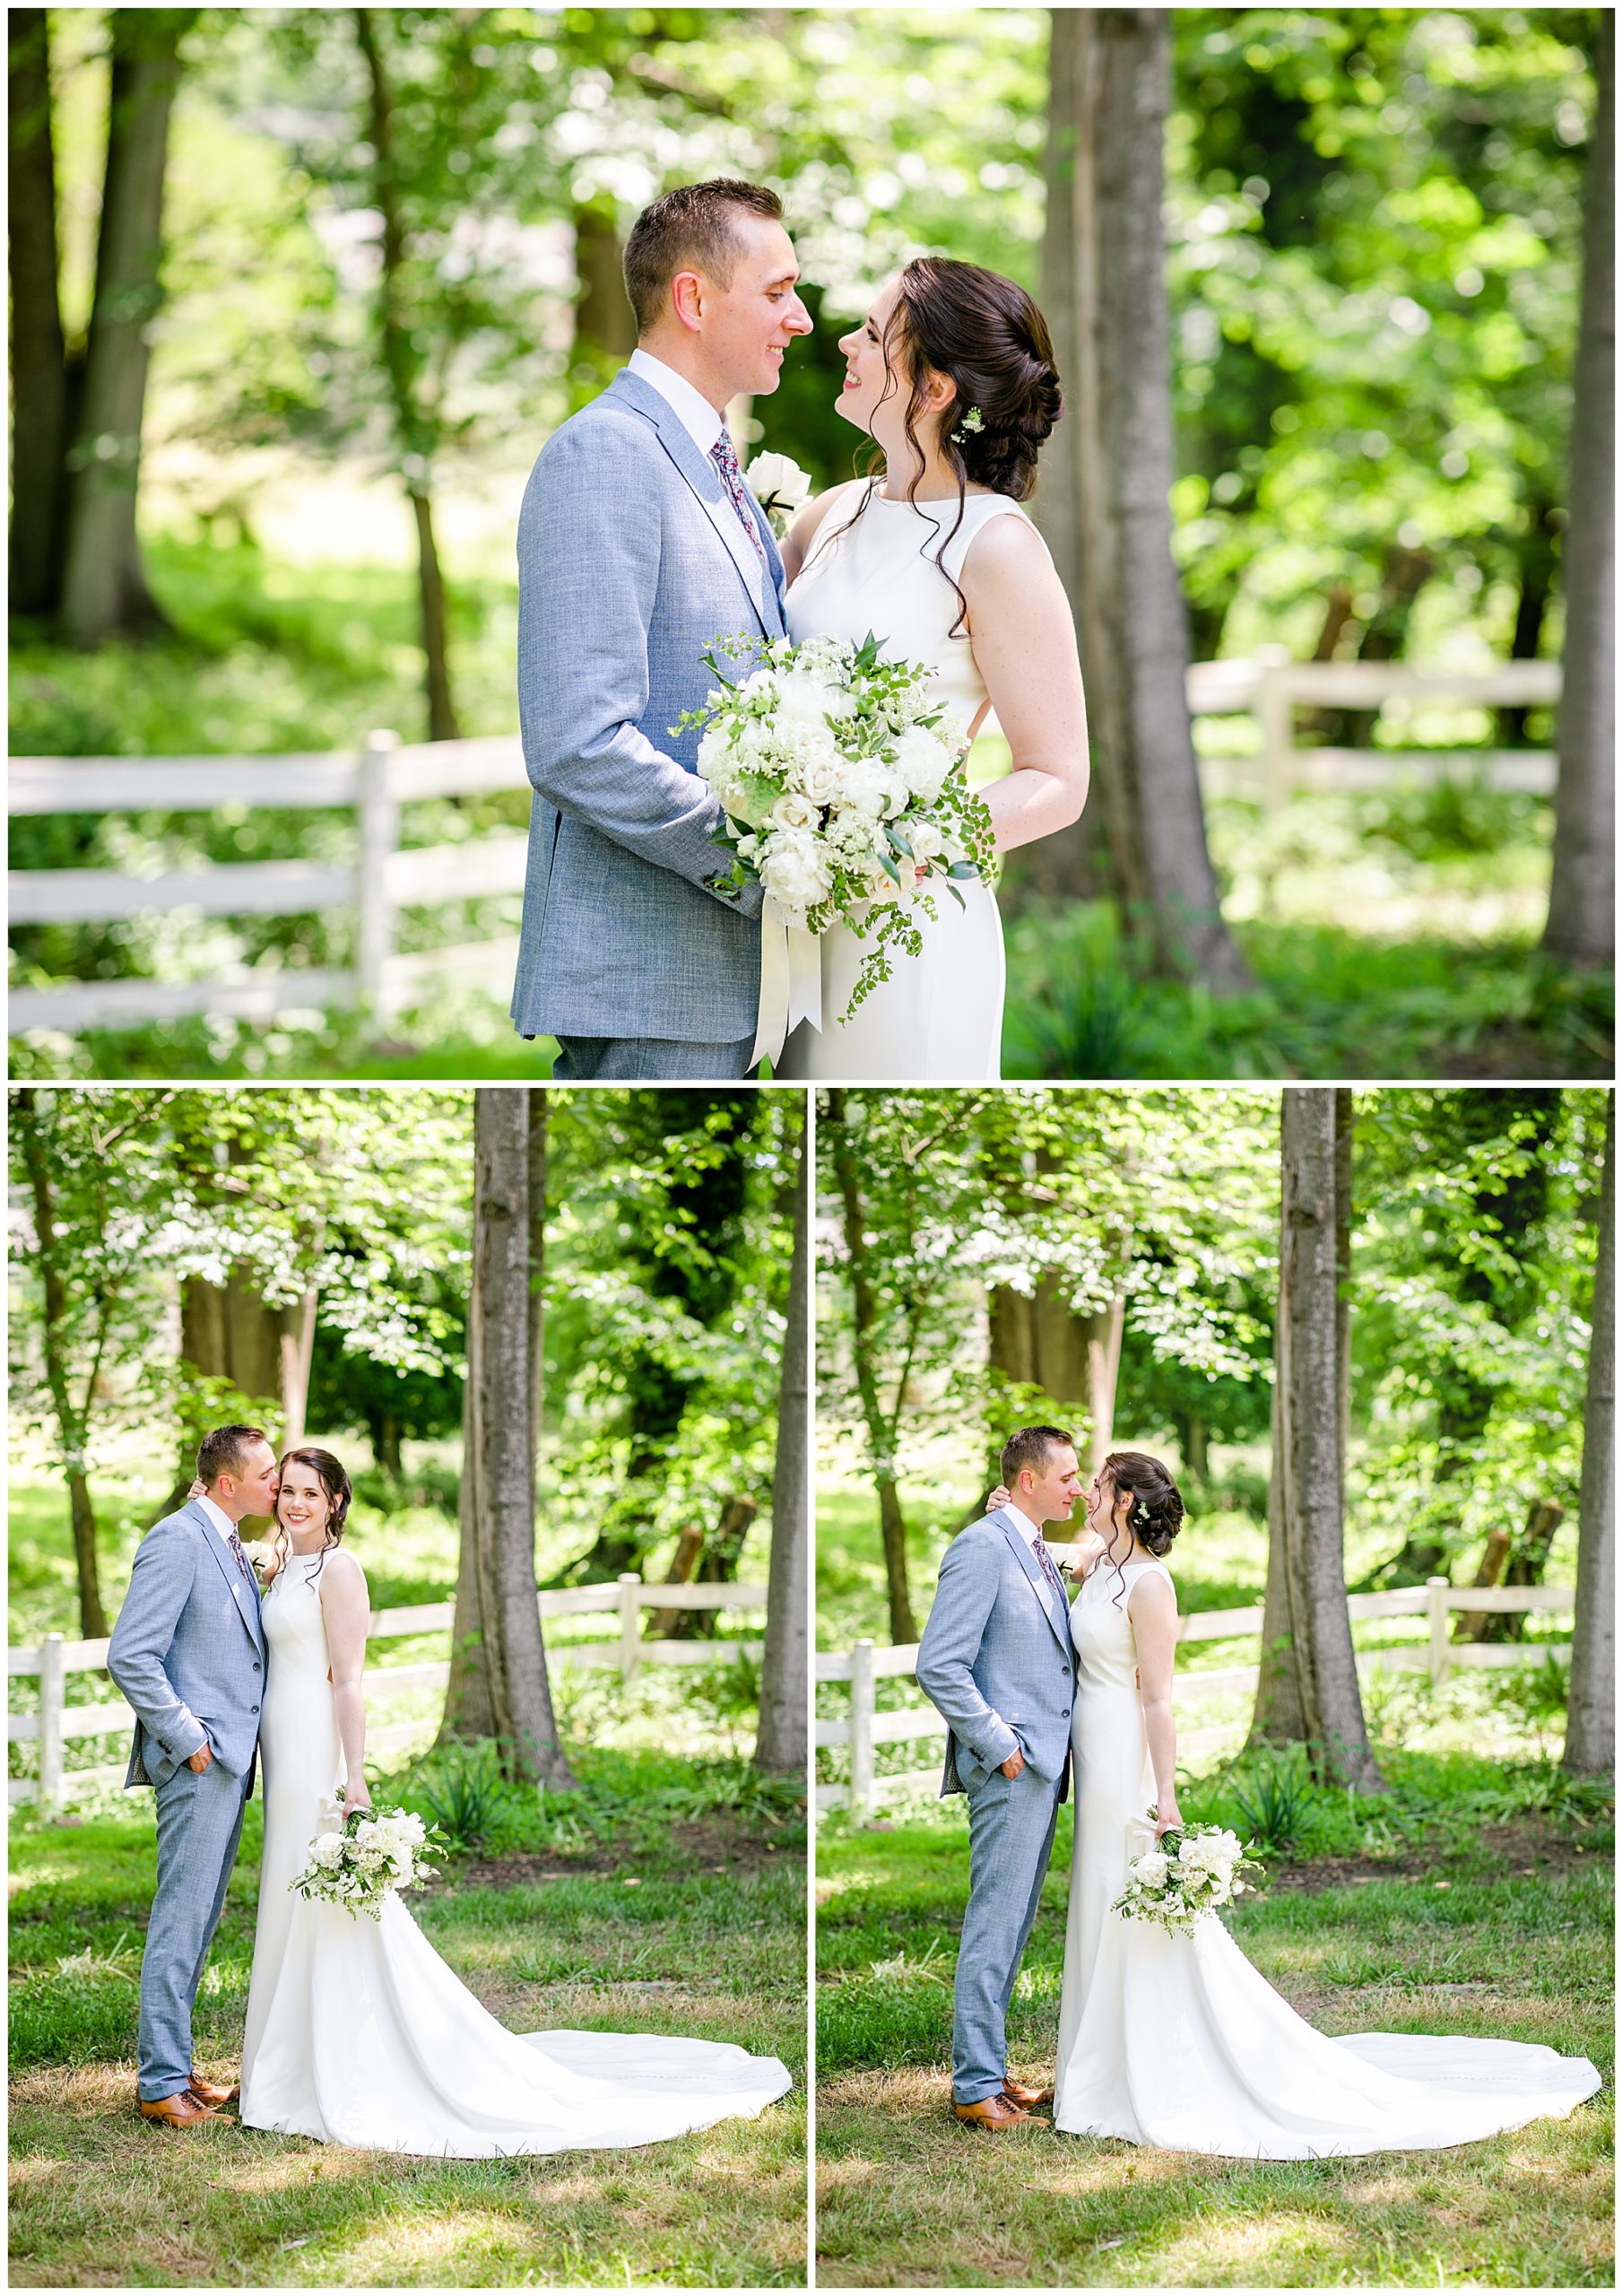 northern Virginia backyard elopement, summer wedding, backyard wedding, at-home wedding, outdoor wedding ceremony, small wedding, intimate wedding, pastels aesthetic, neutral aesthetic, simple wedding decor, Virginia wedding photographer, DC wedding photographer, Virginia wedding photography, Rachel E.H. Photography, newlywed portraits